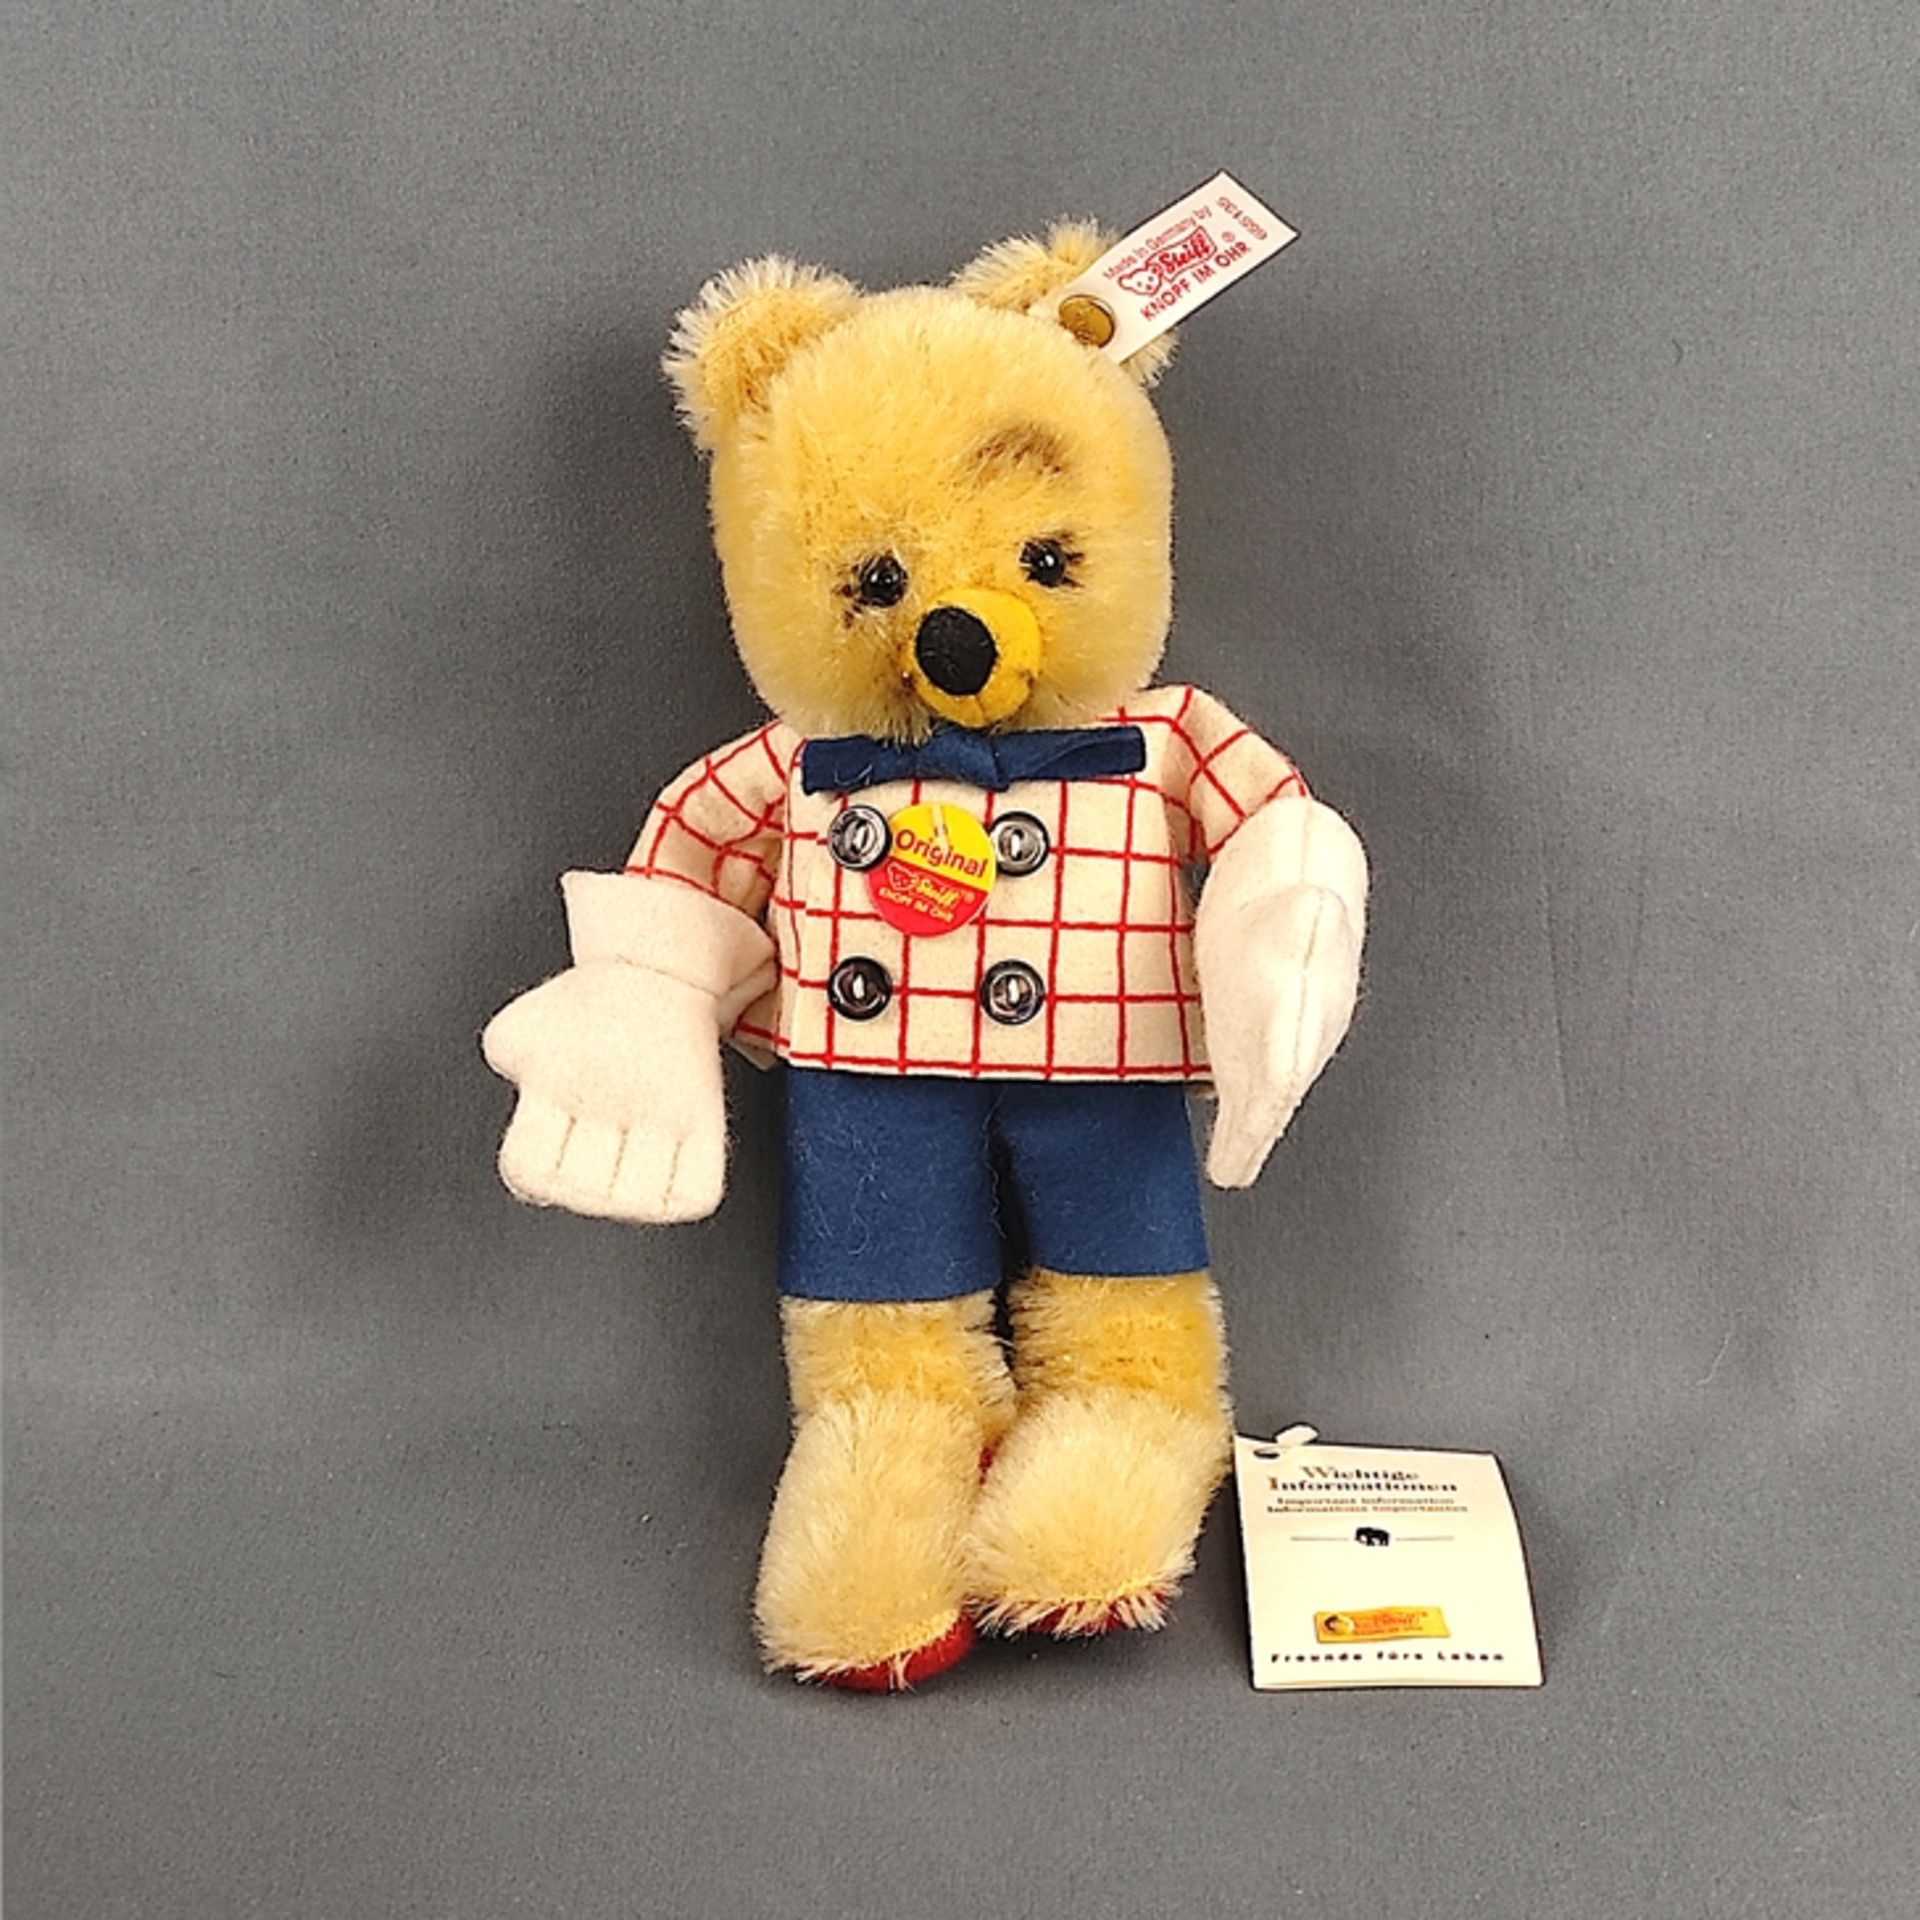 Steiff "Breuni-Bear", 655135, Ex. 70/1500,1995, length 20cm, with button, sign and flag, in origina - Image 2 of 4